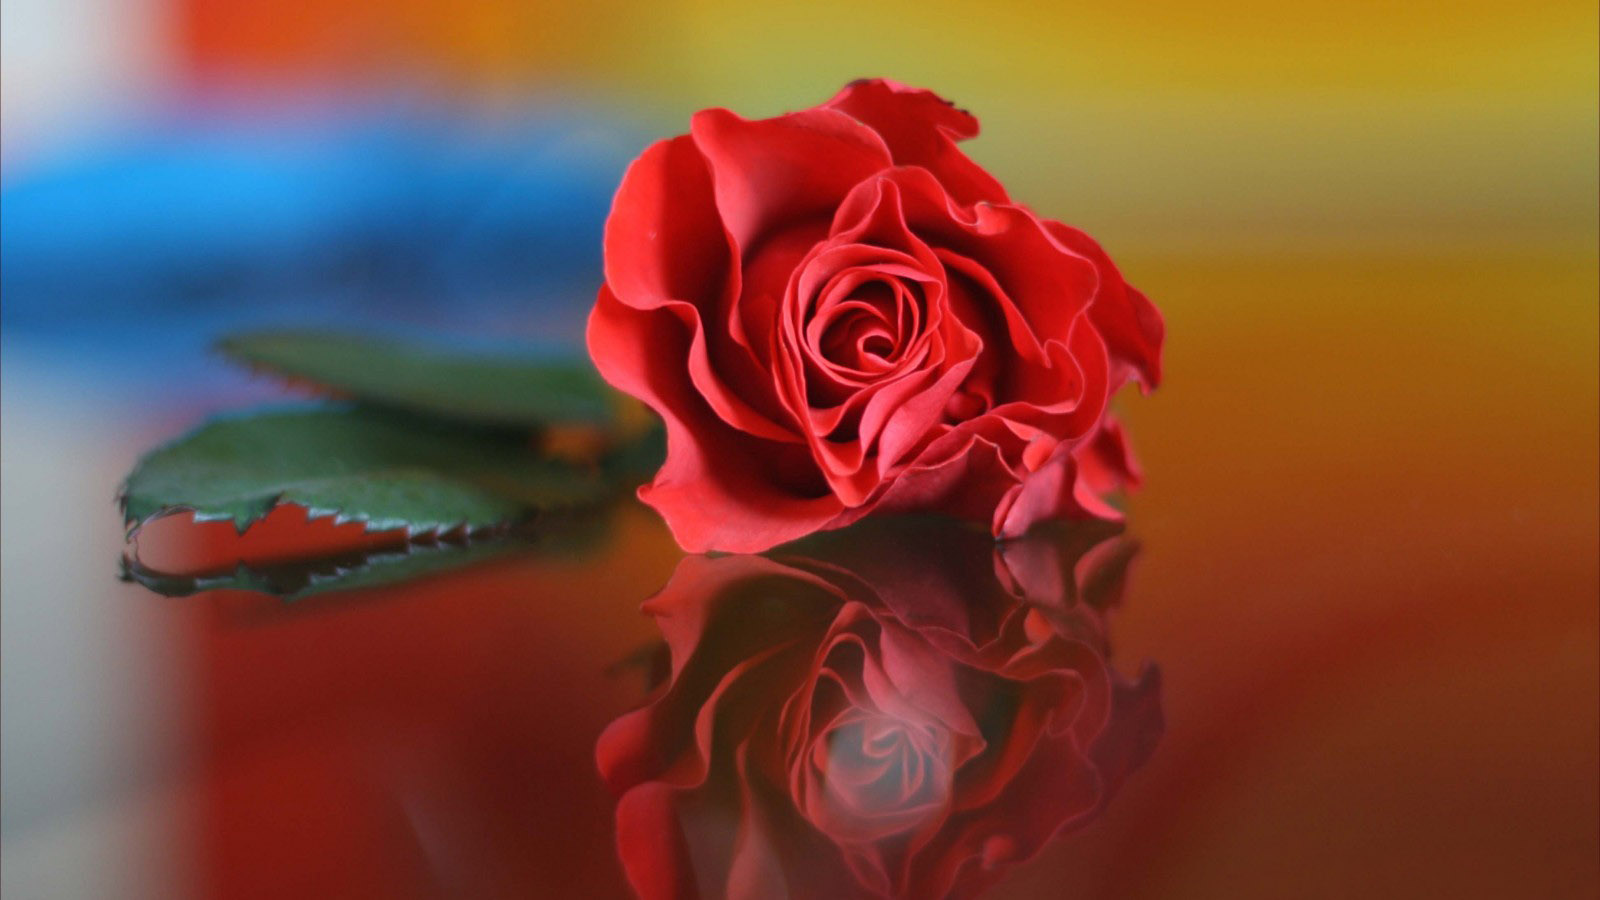 latest valentine red rose gorgeous hd wallpaper iphone pics download